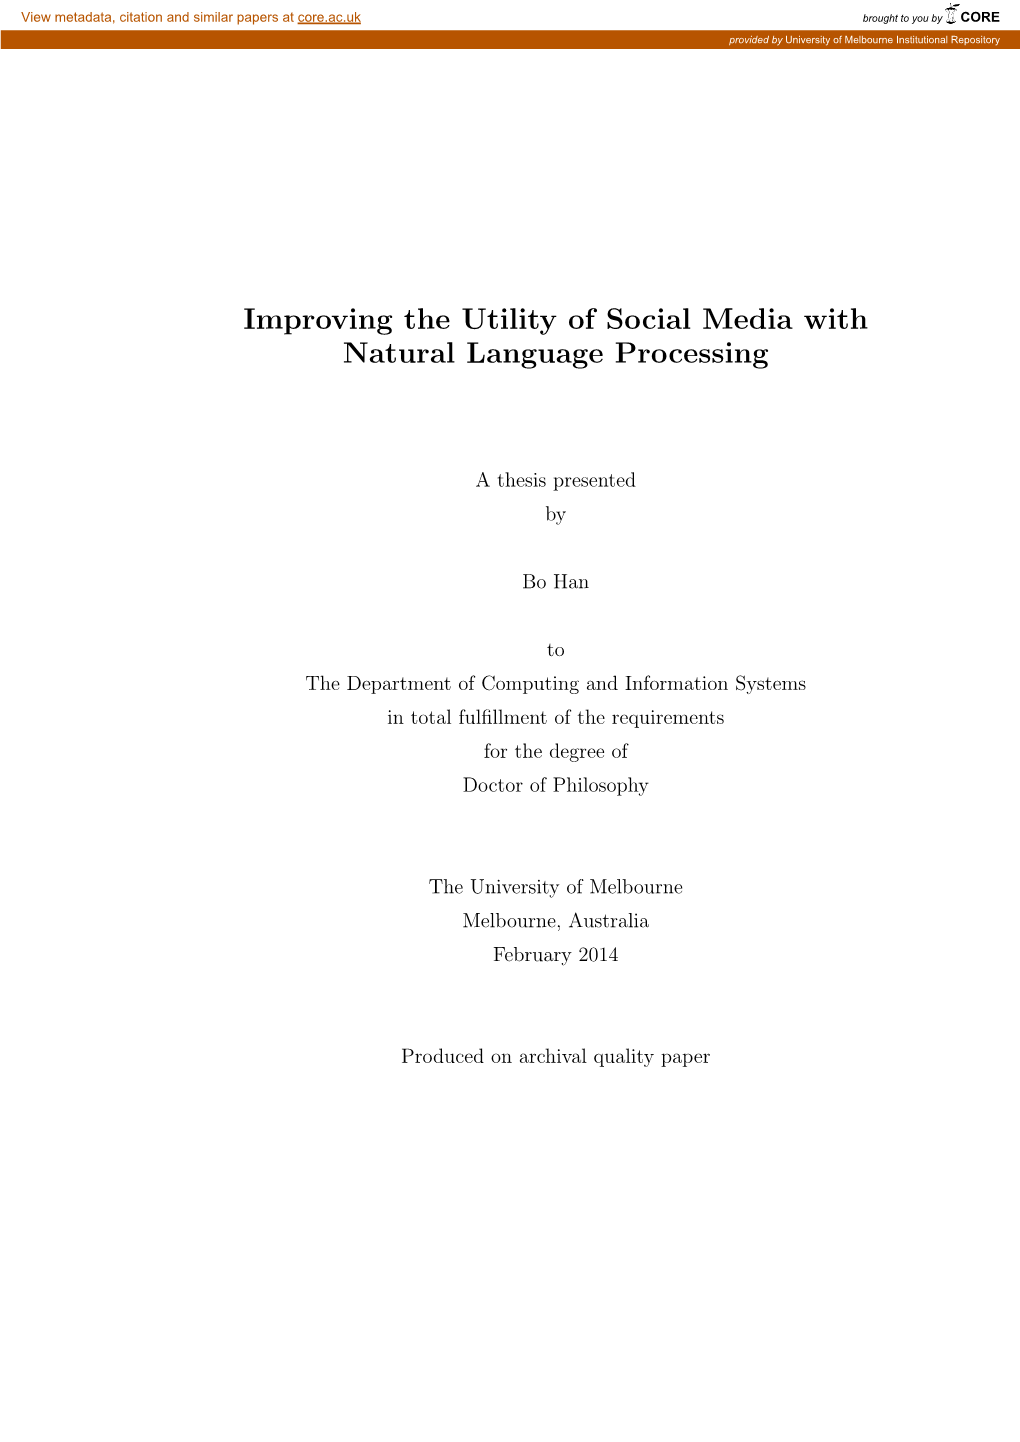 Improving the Utility of Social Media with Natural Language Processing